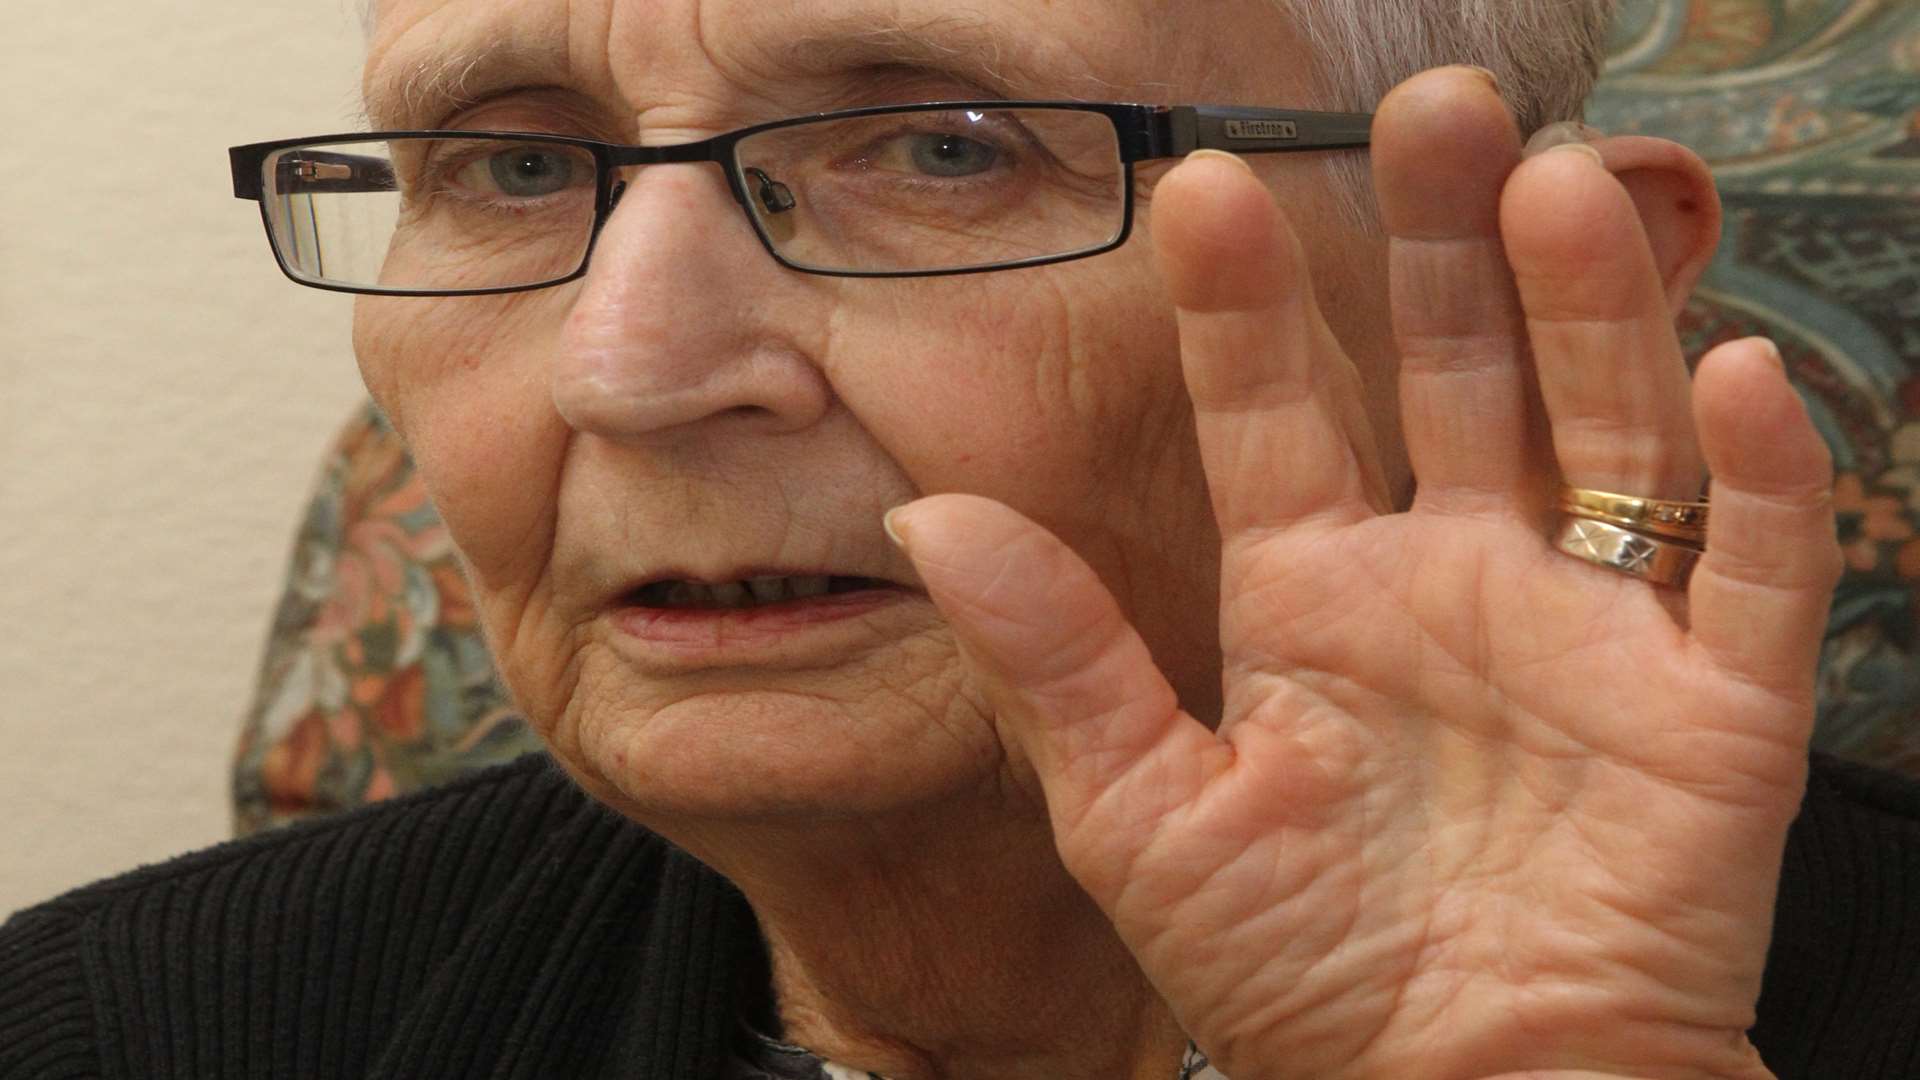 Patricia's finger, four days after her injury. Picture: John Westhrop